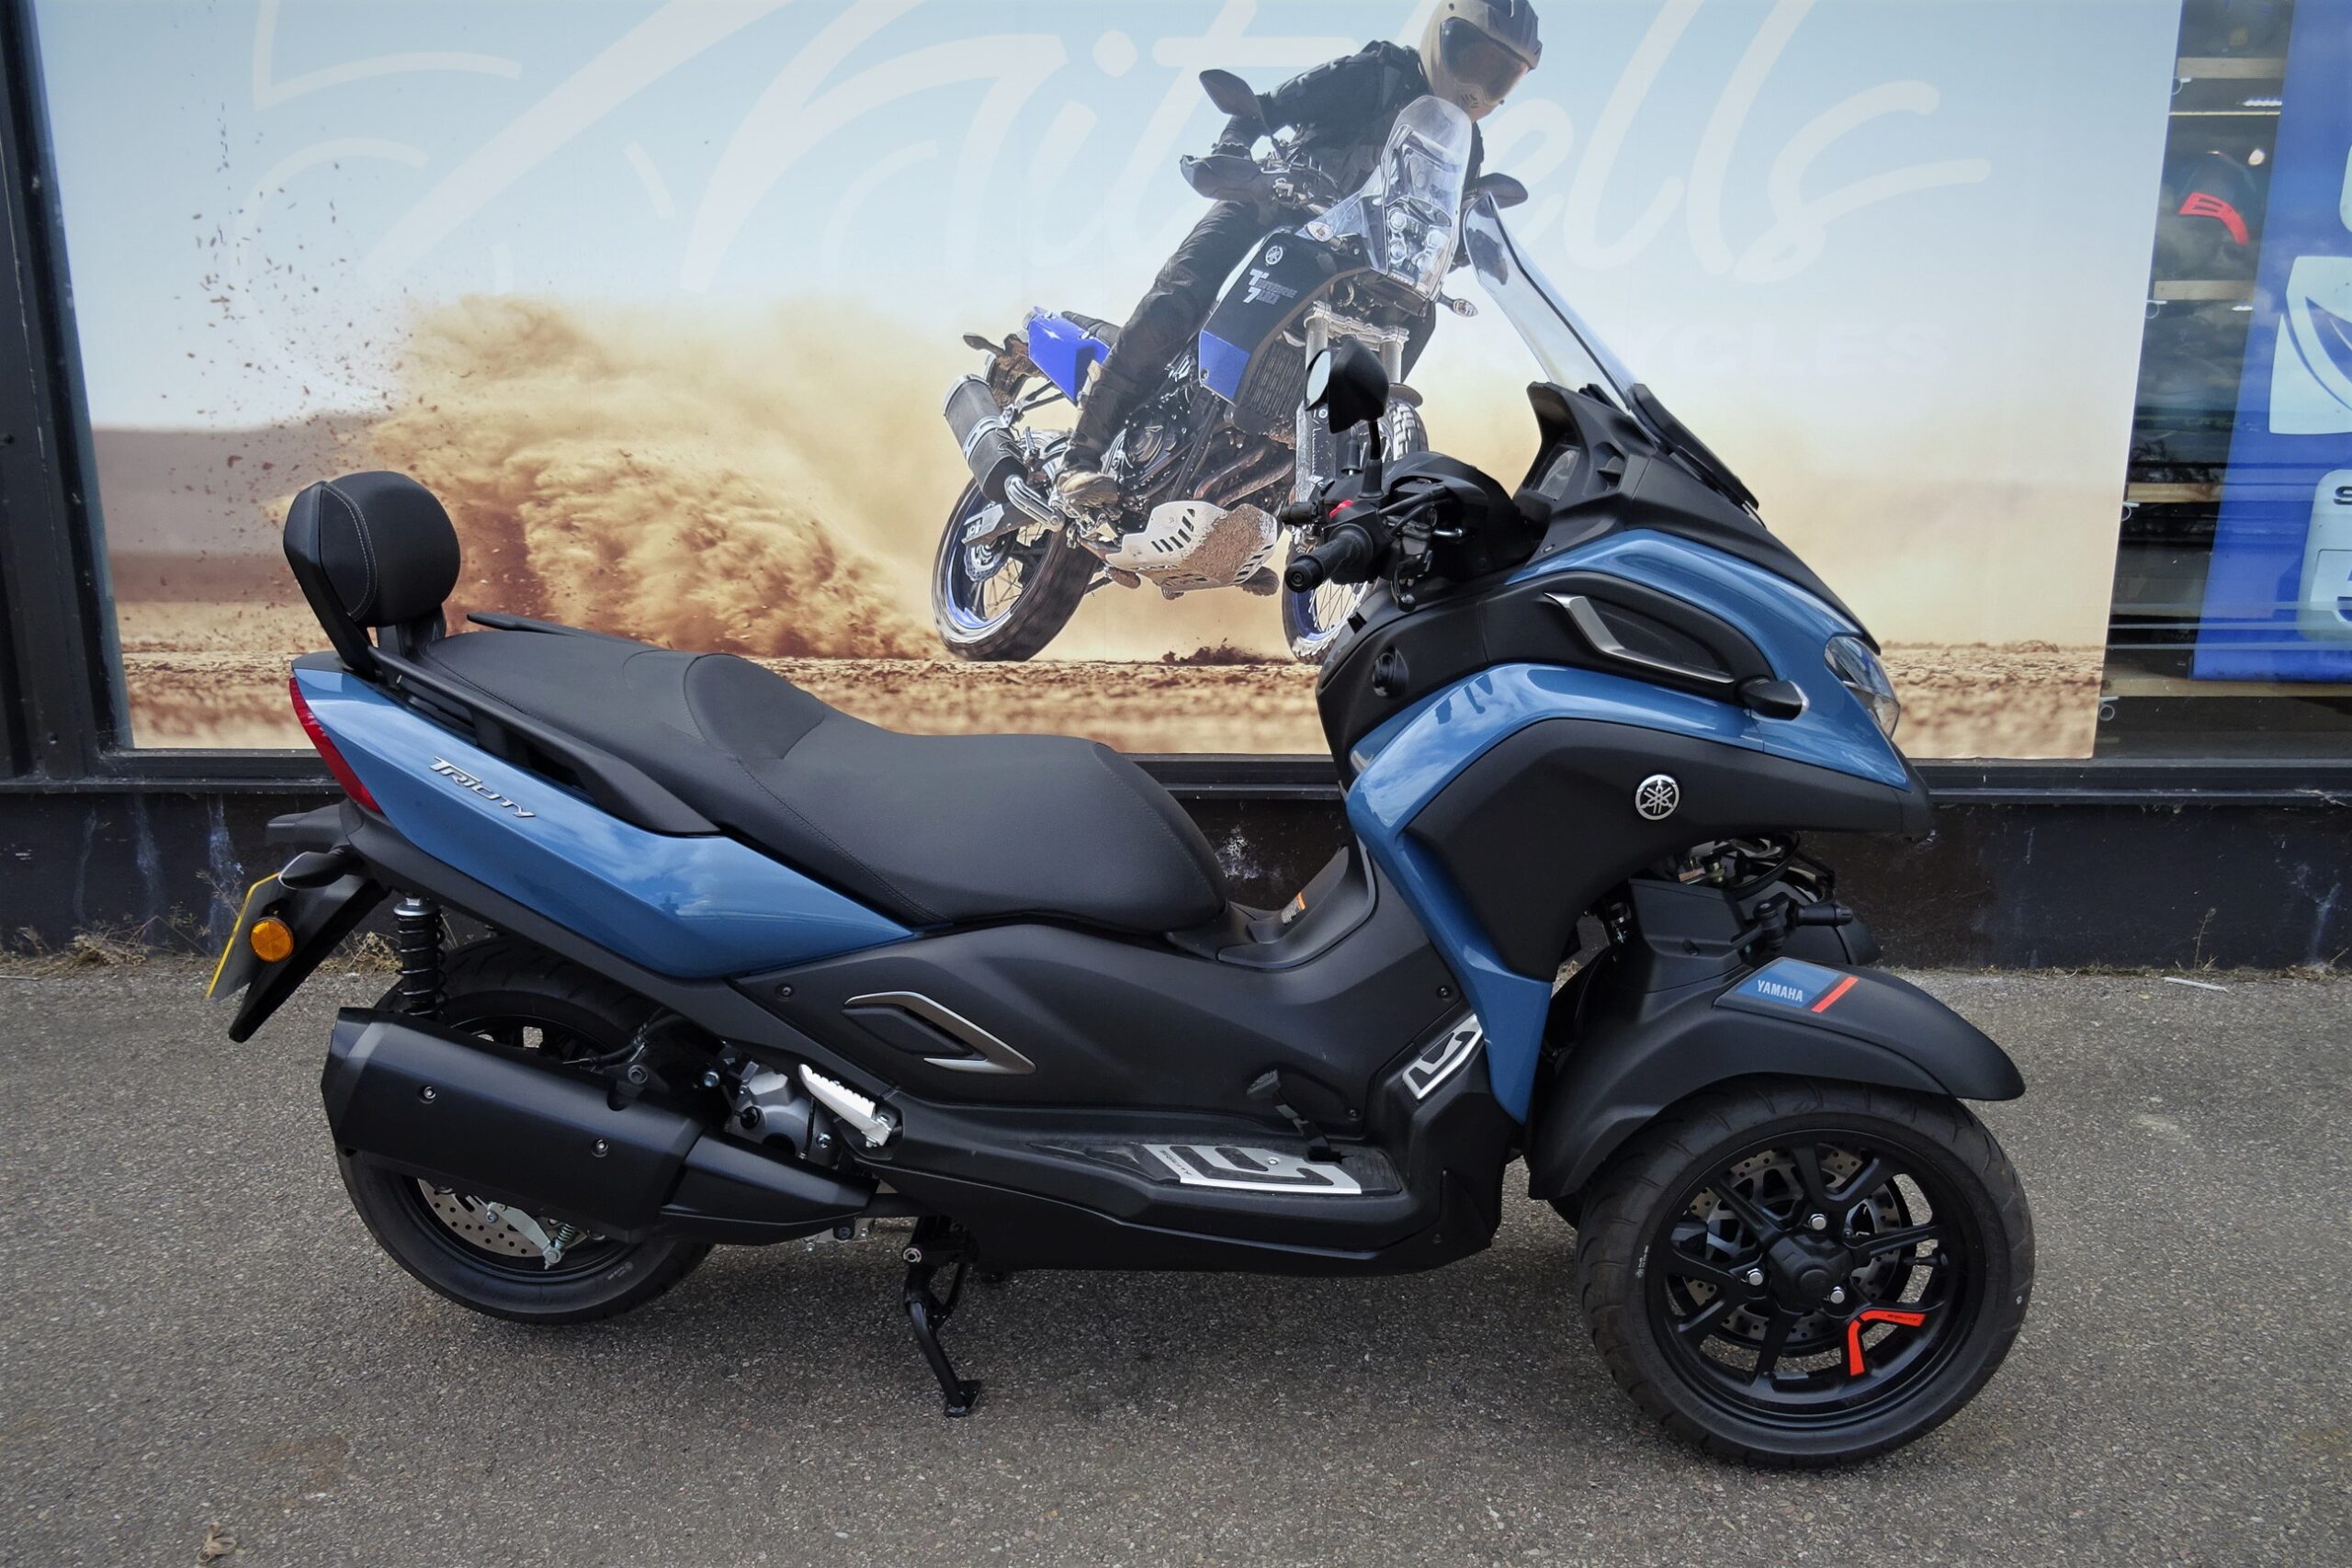 YAMAHA MWD 300 TRICITY 300 *Save £1,115 off new price* - Mitchells  Motorcycles